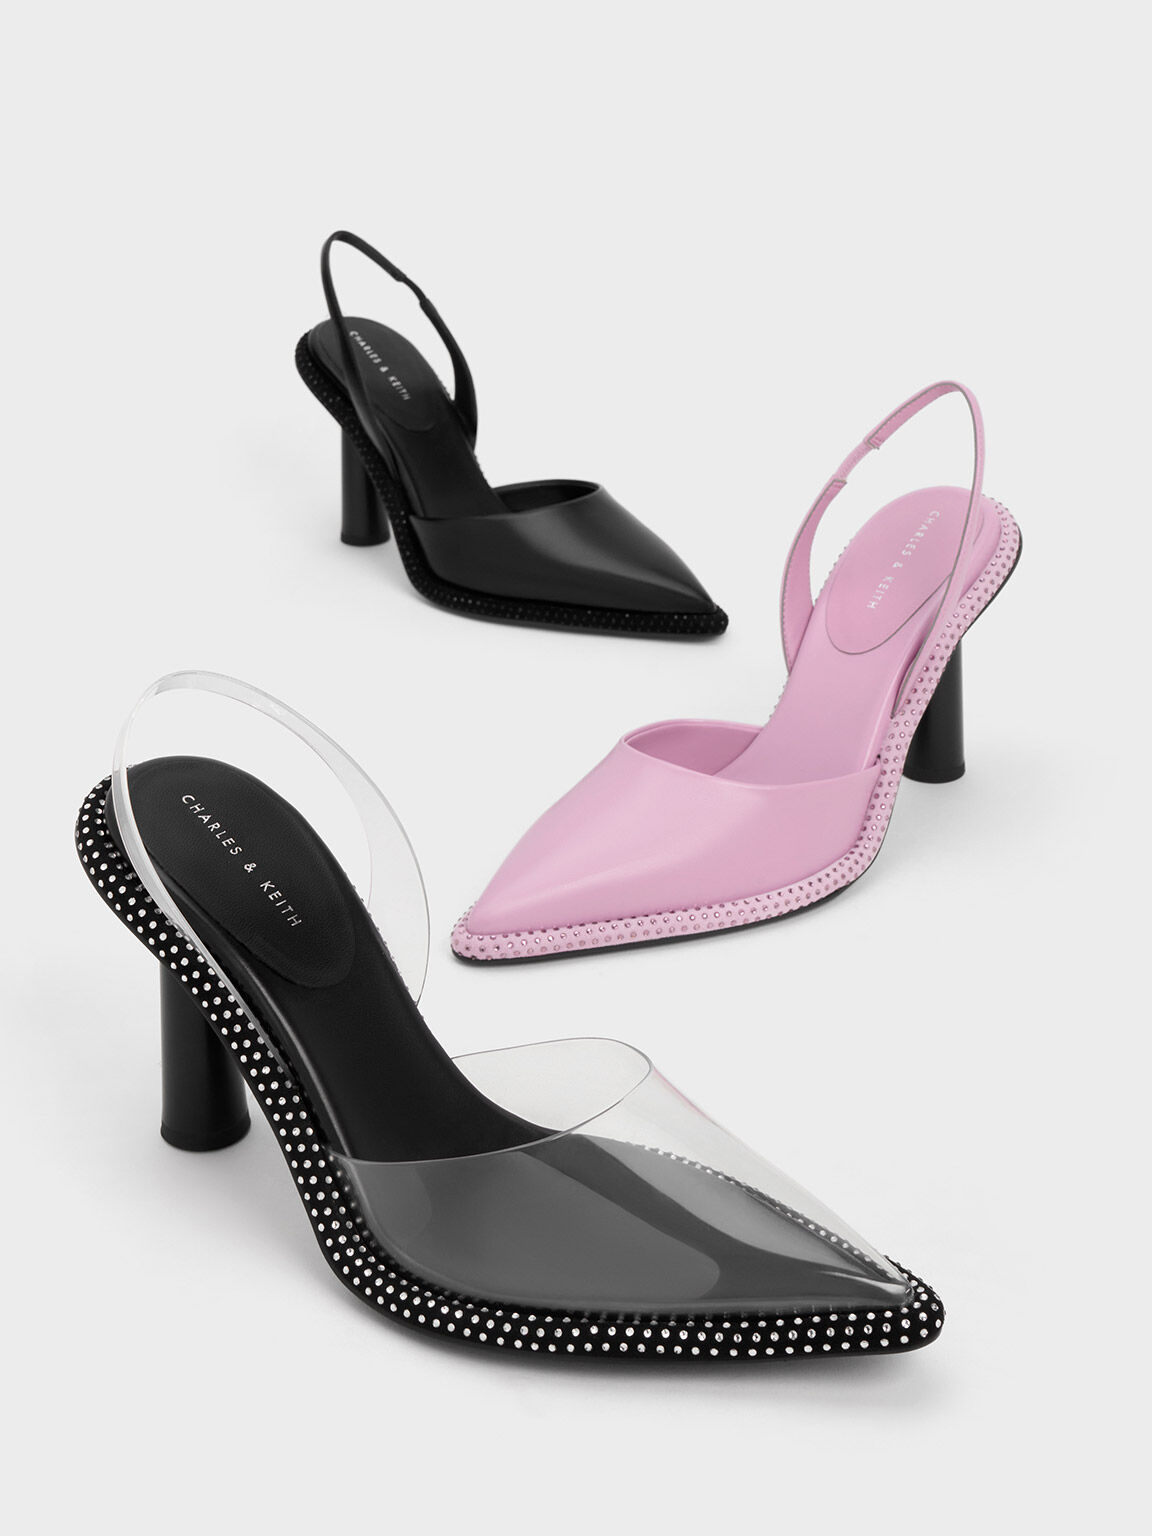 Charles & Keith Women's Platform Sandals | Stylicy India